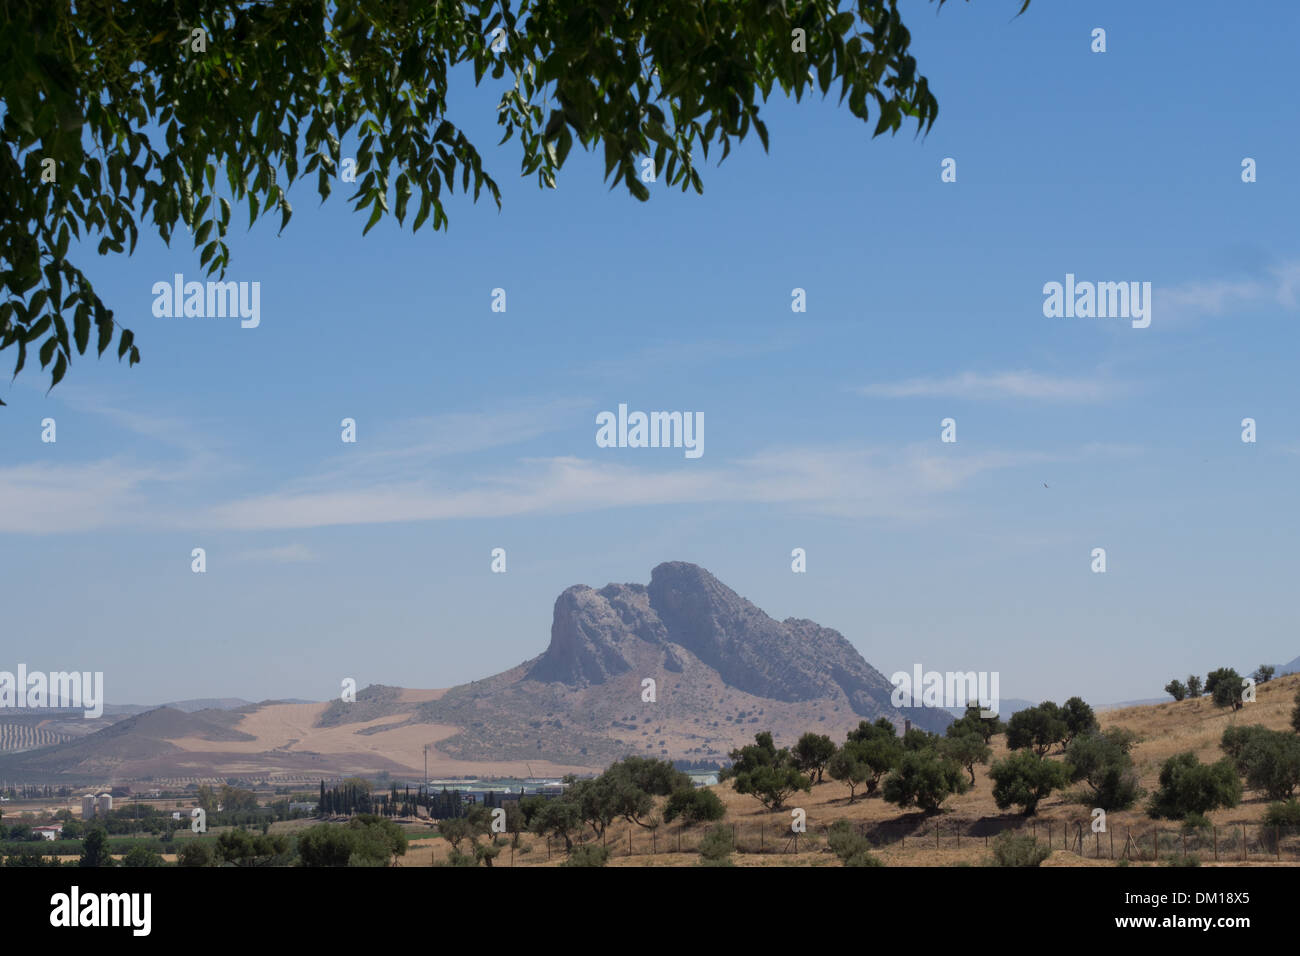 Unusual natural rock formation near Antequera, Andalucia, Spain. Looks like an Indian Chief's face lying down. Stock Photo